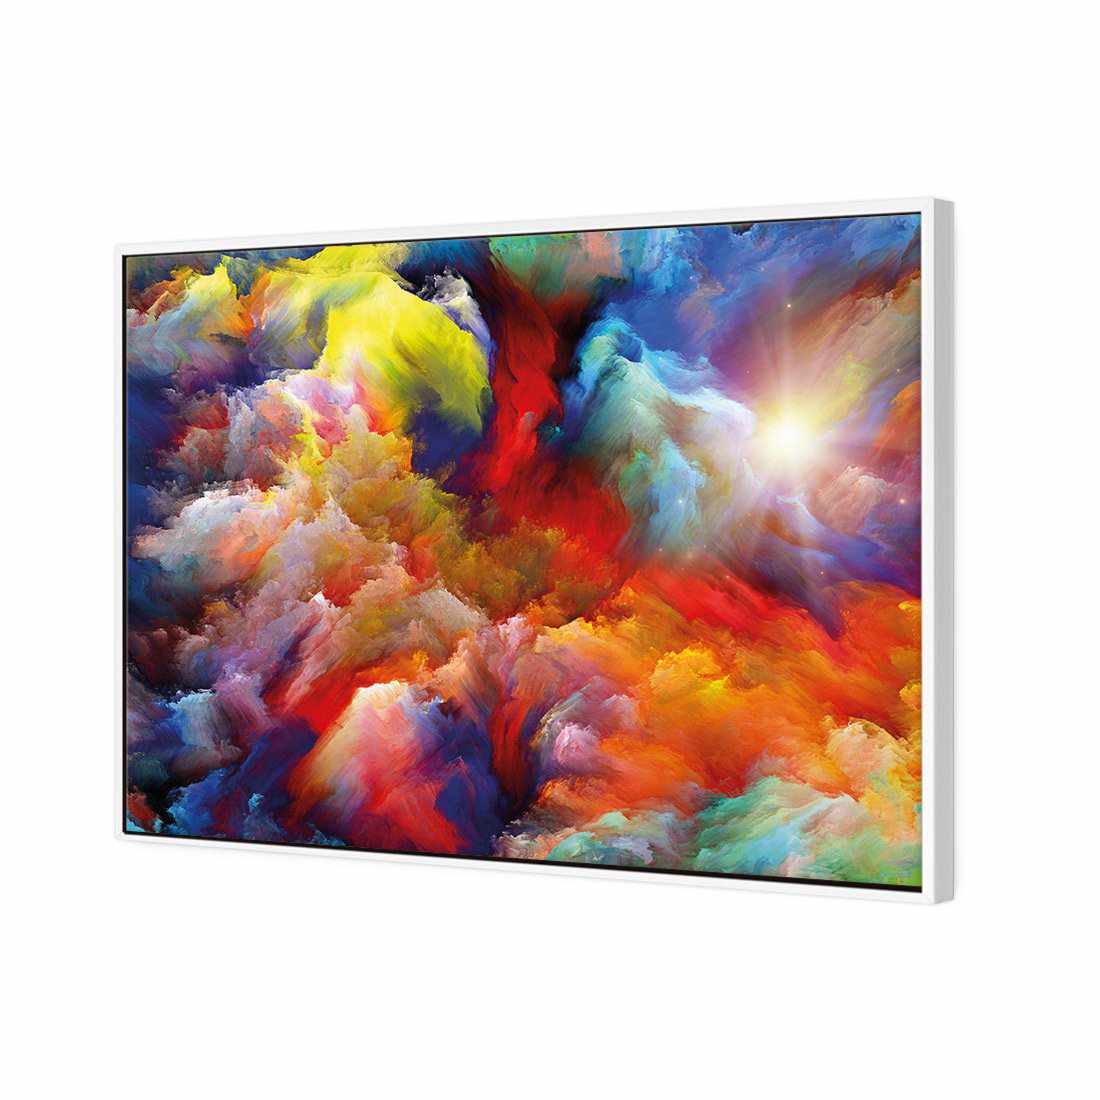 Clouds Of Colour Canvas Art-Canvas-Wall Art Designs-45x30cm-Canvas - White Frame-Wall Art Designs